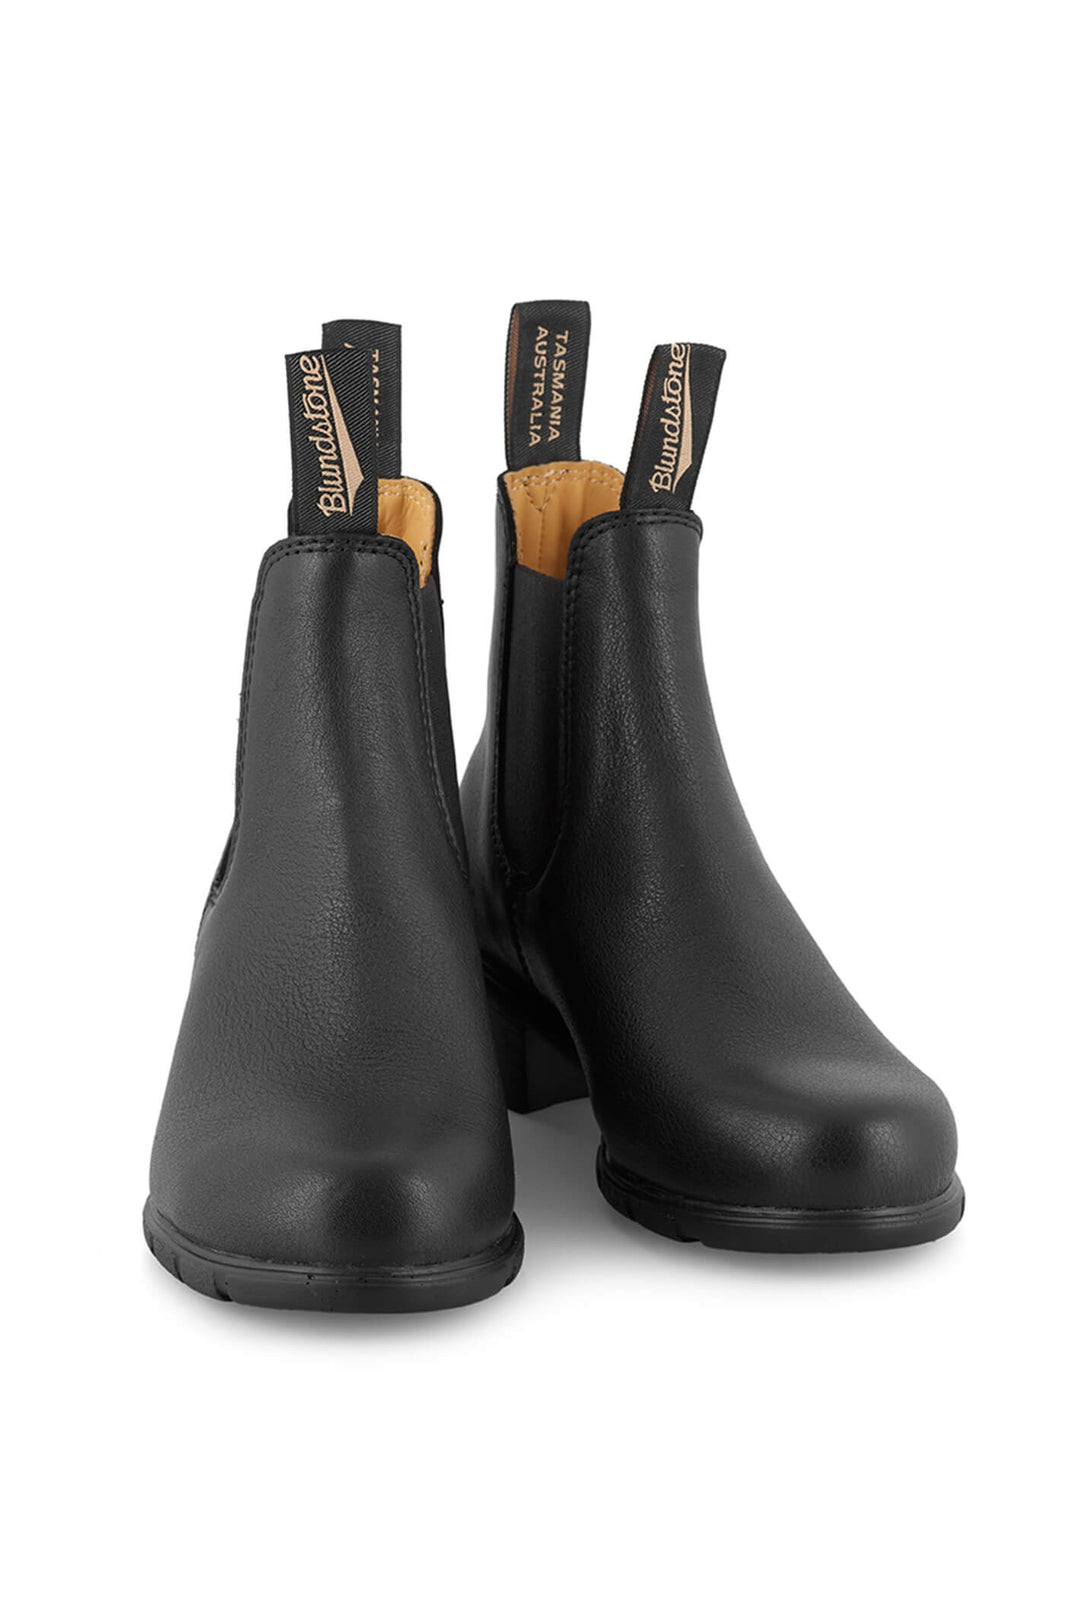 Blundstone 1671 Black Leather Ankle Boots